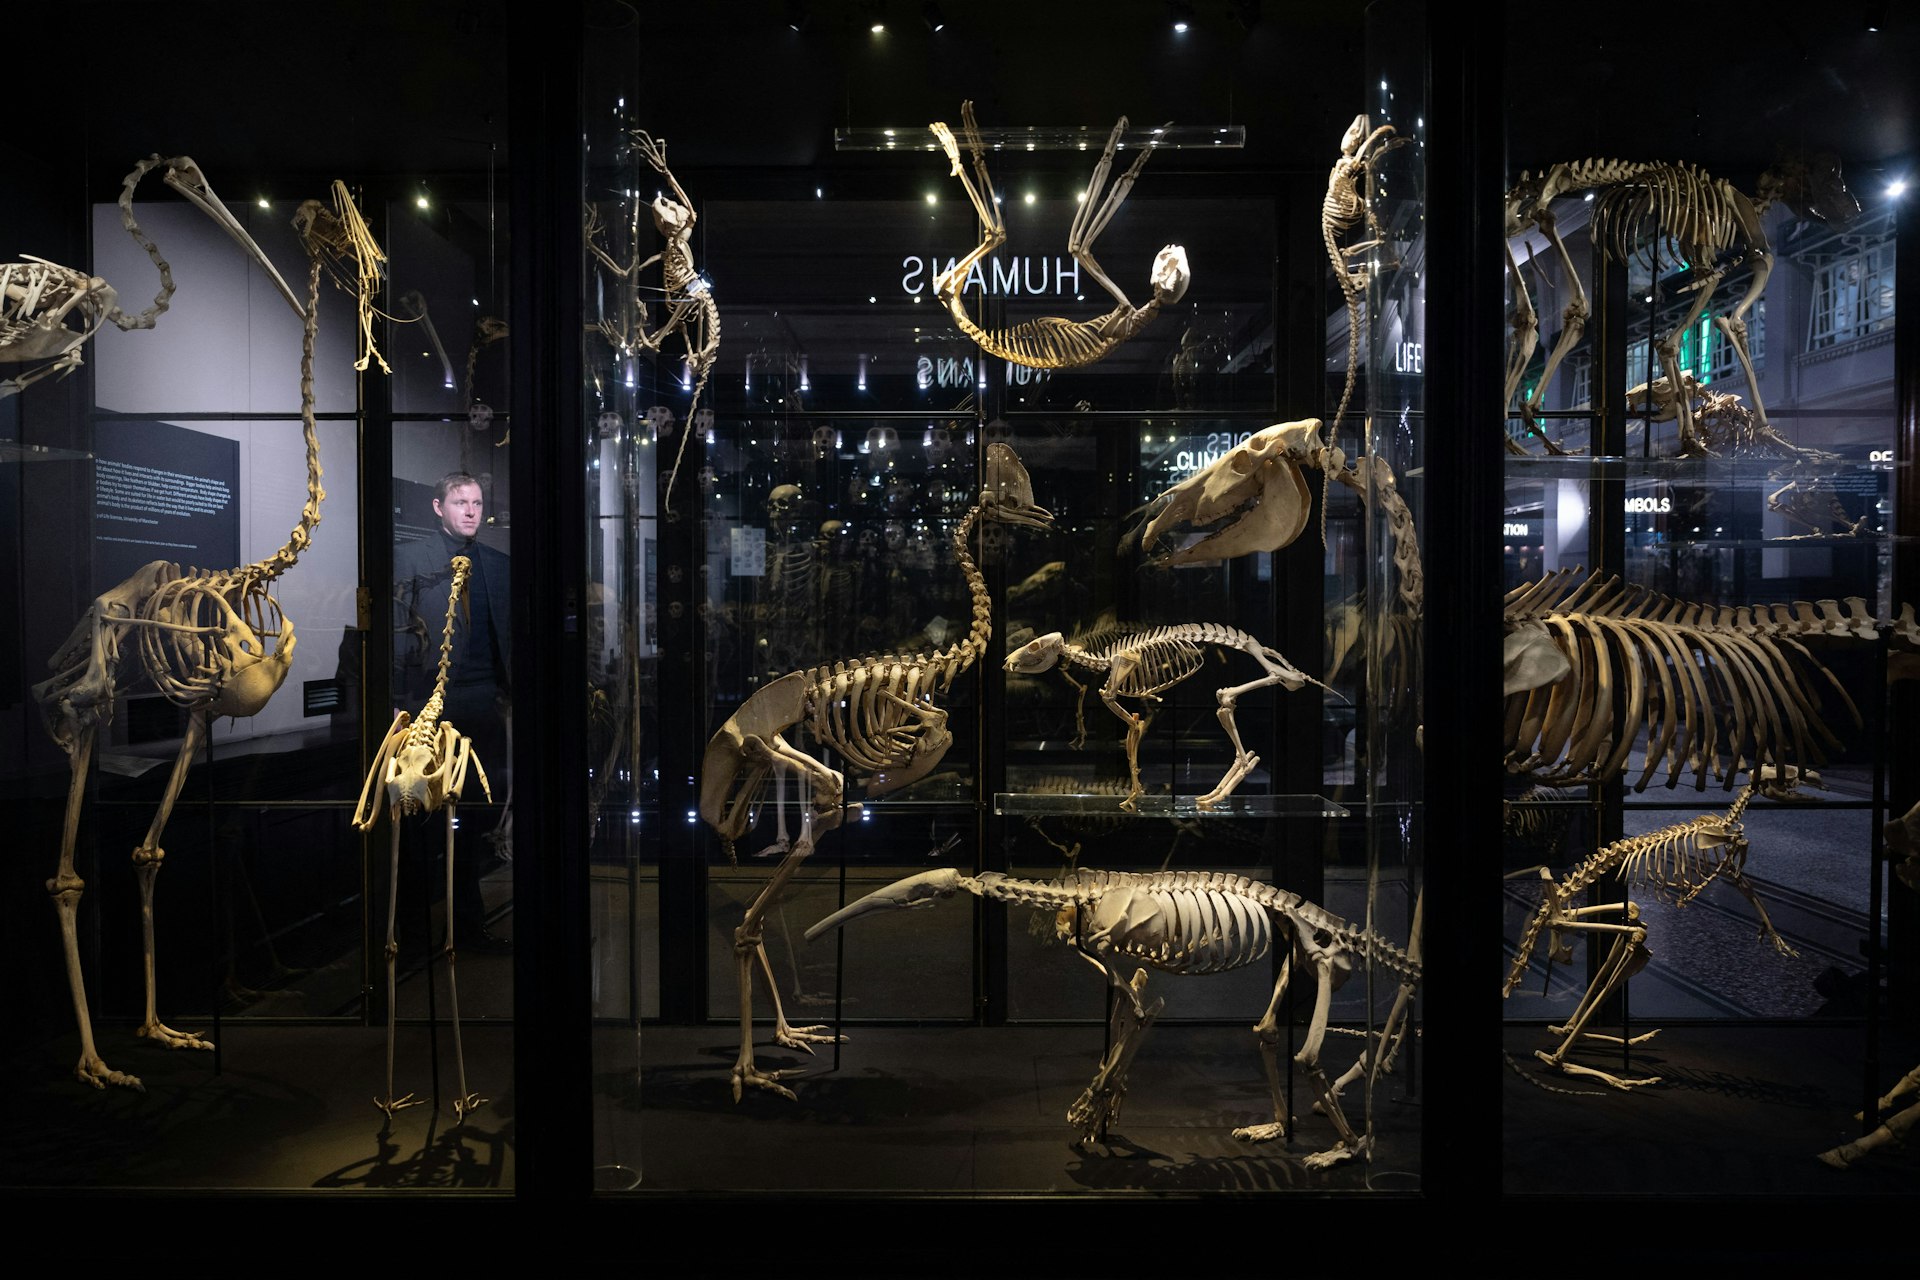 An exhibition case shows animal skeletons in a darkened museum. 